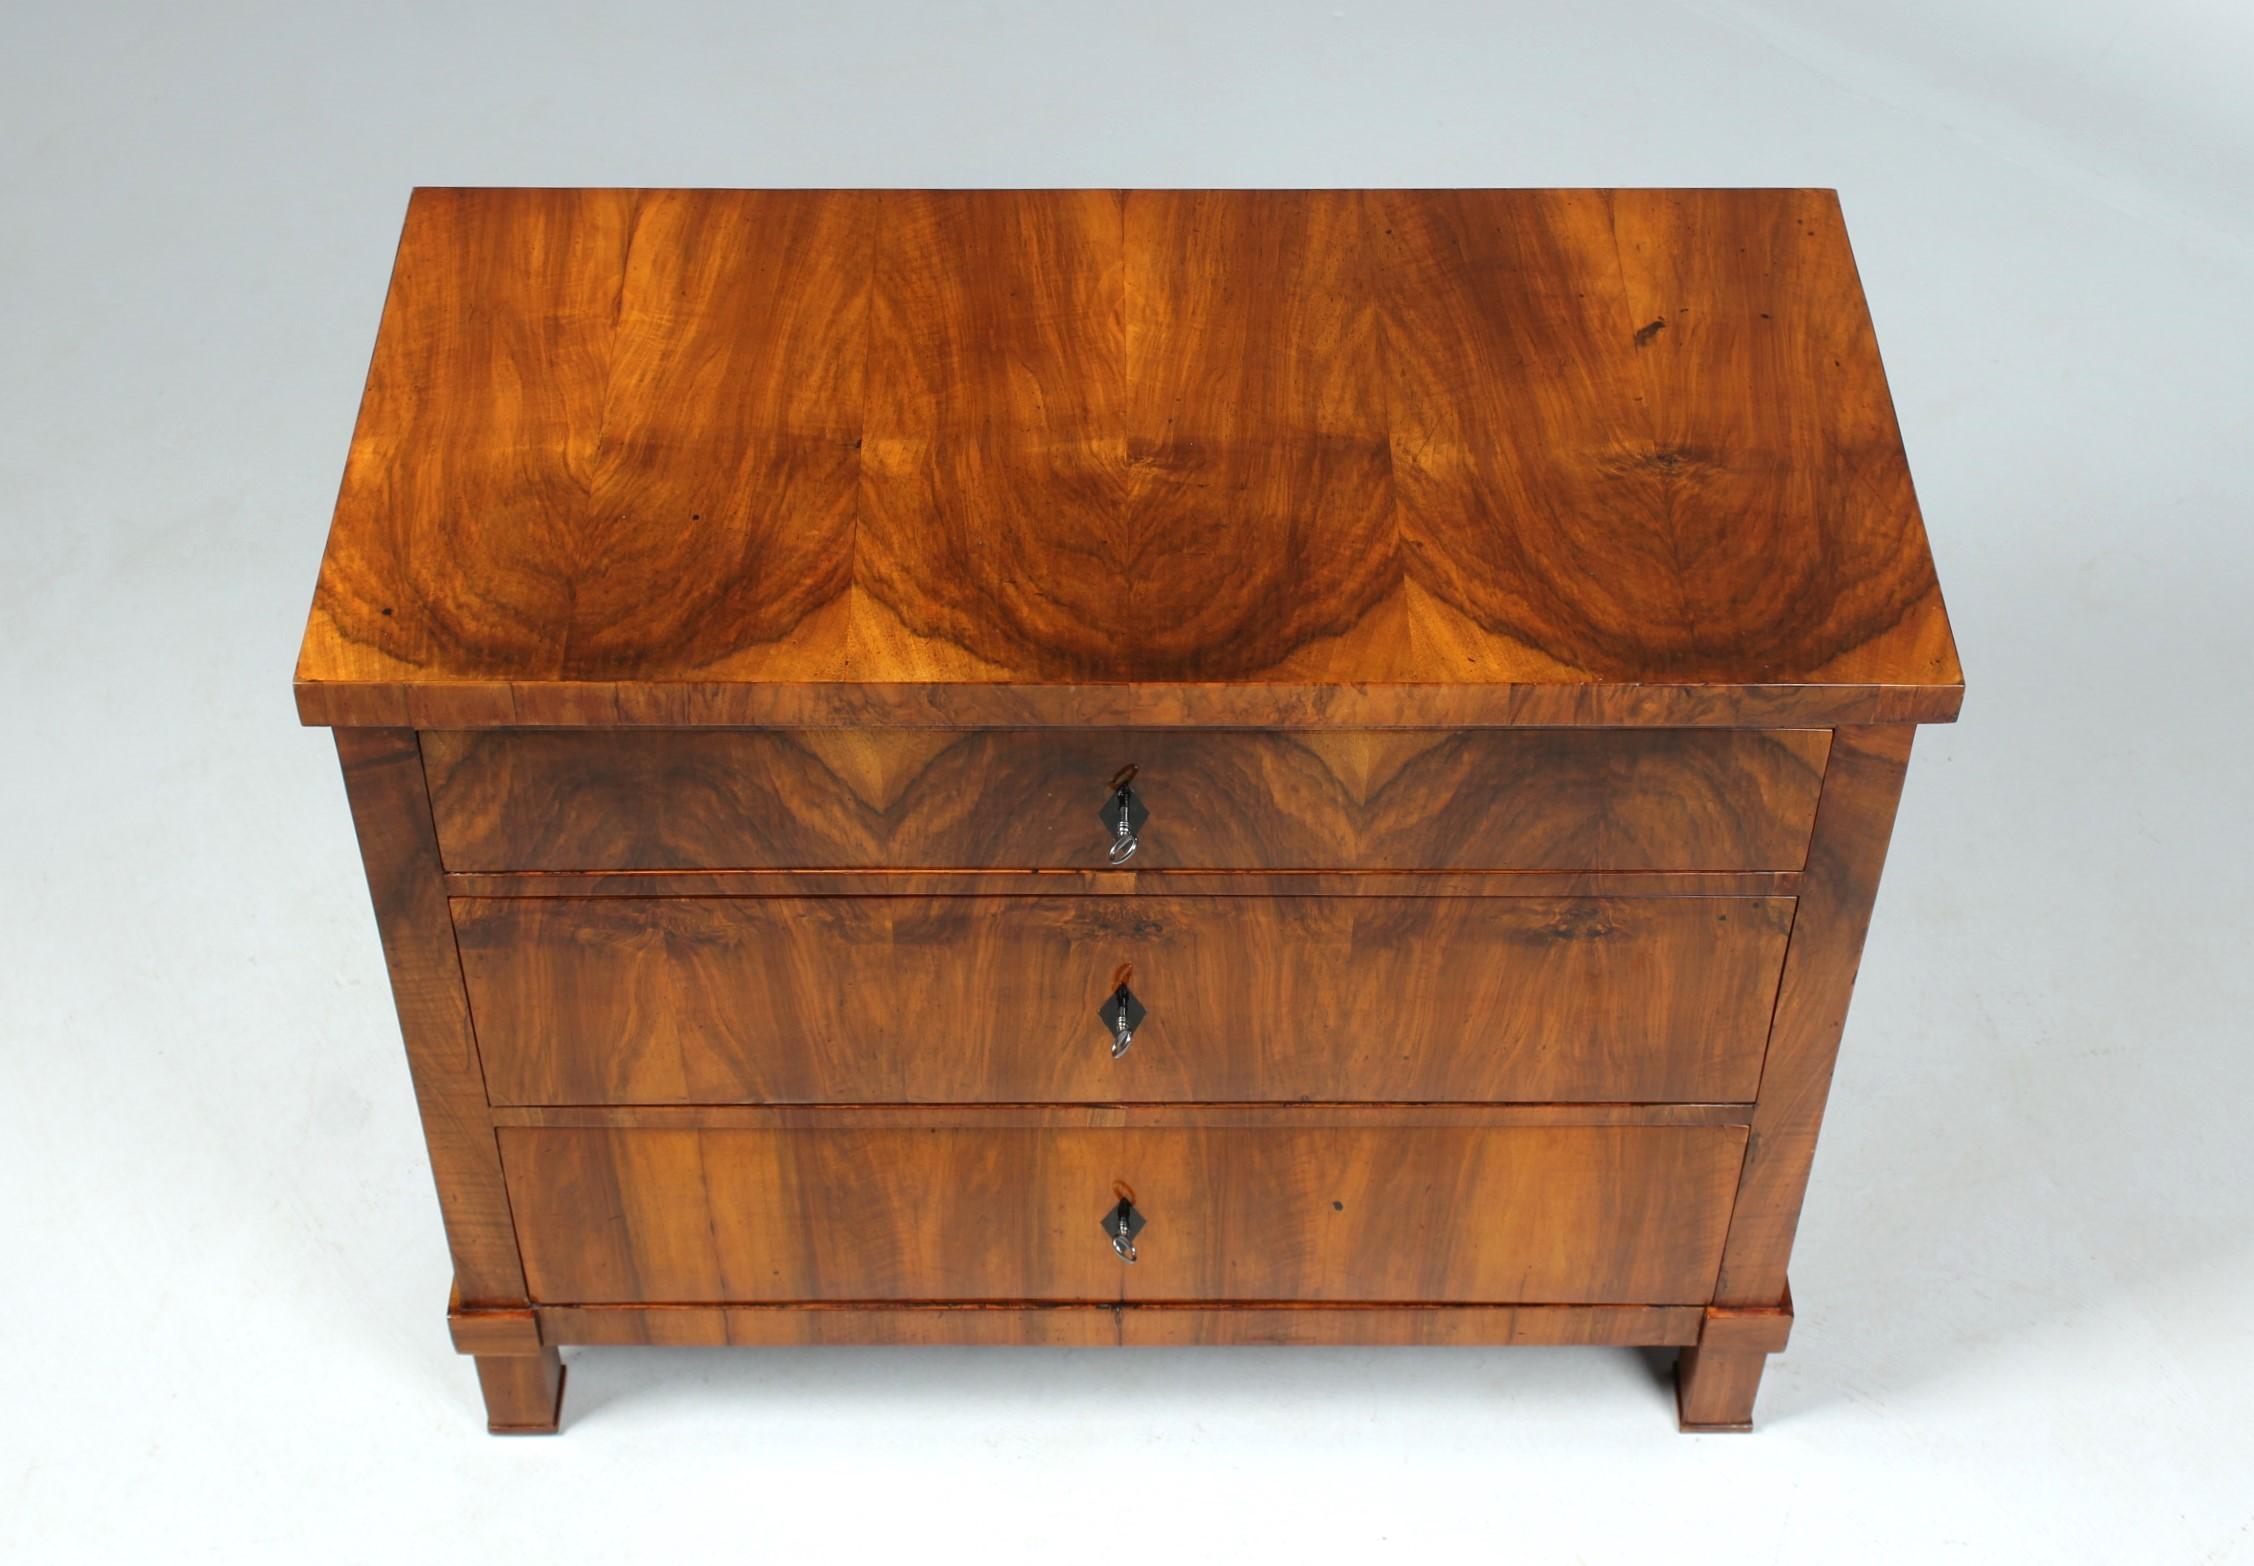 Small Biedermeier chest of drawers with exquisitely beautiful grain

South-West Germany (Baden)
Walnut
Biedermeier around 1825

Dimensions: H x W x D: 76 x 93 x 47 cm

Description:
Classic and austere Biedermeier chest of drawers with a fantastic